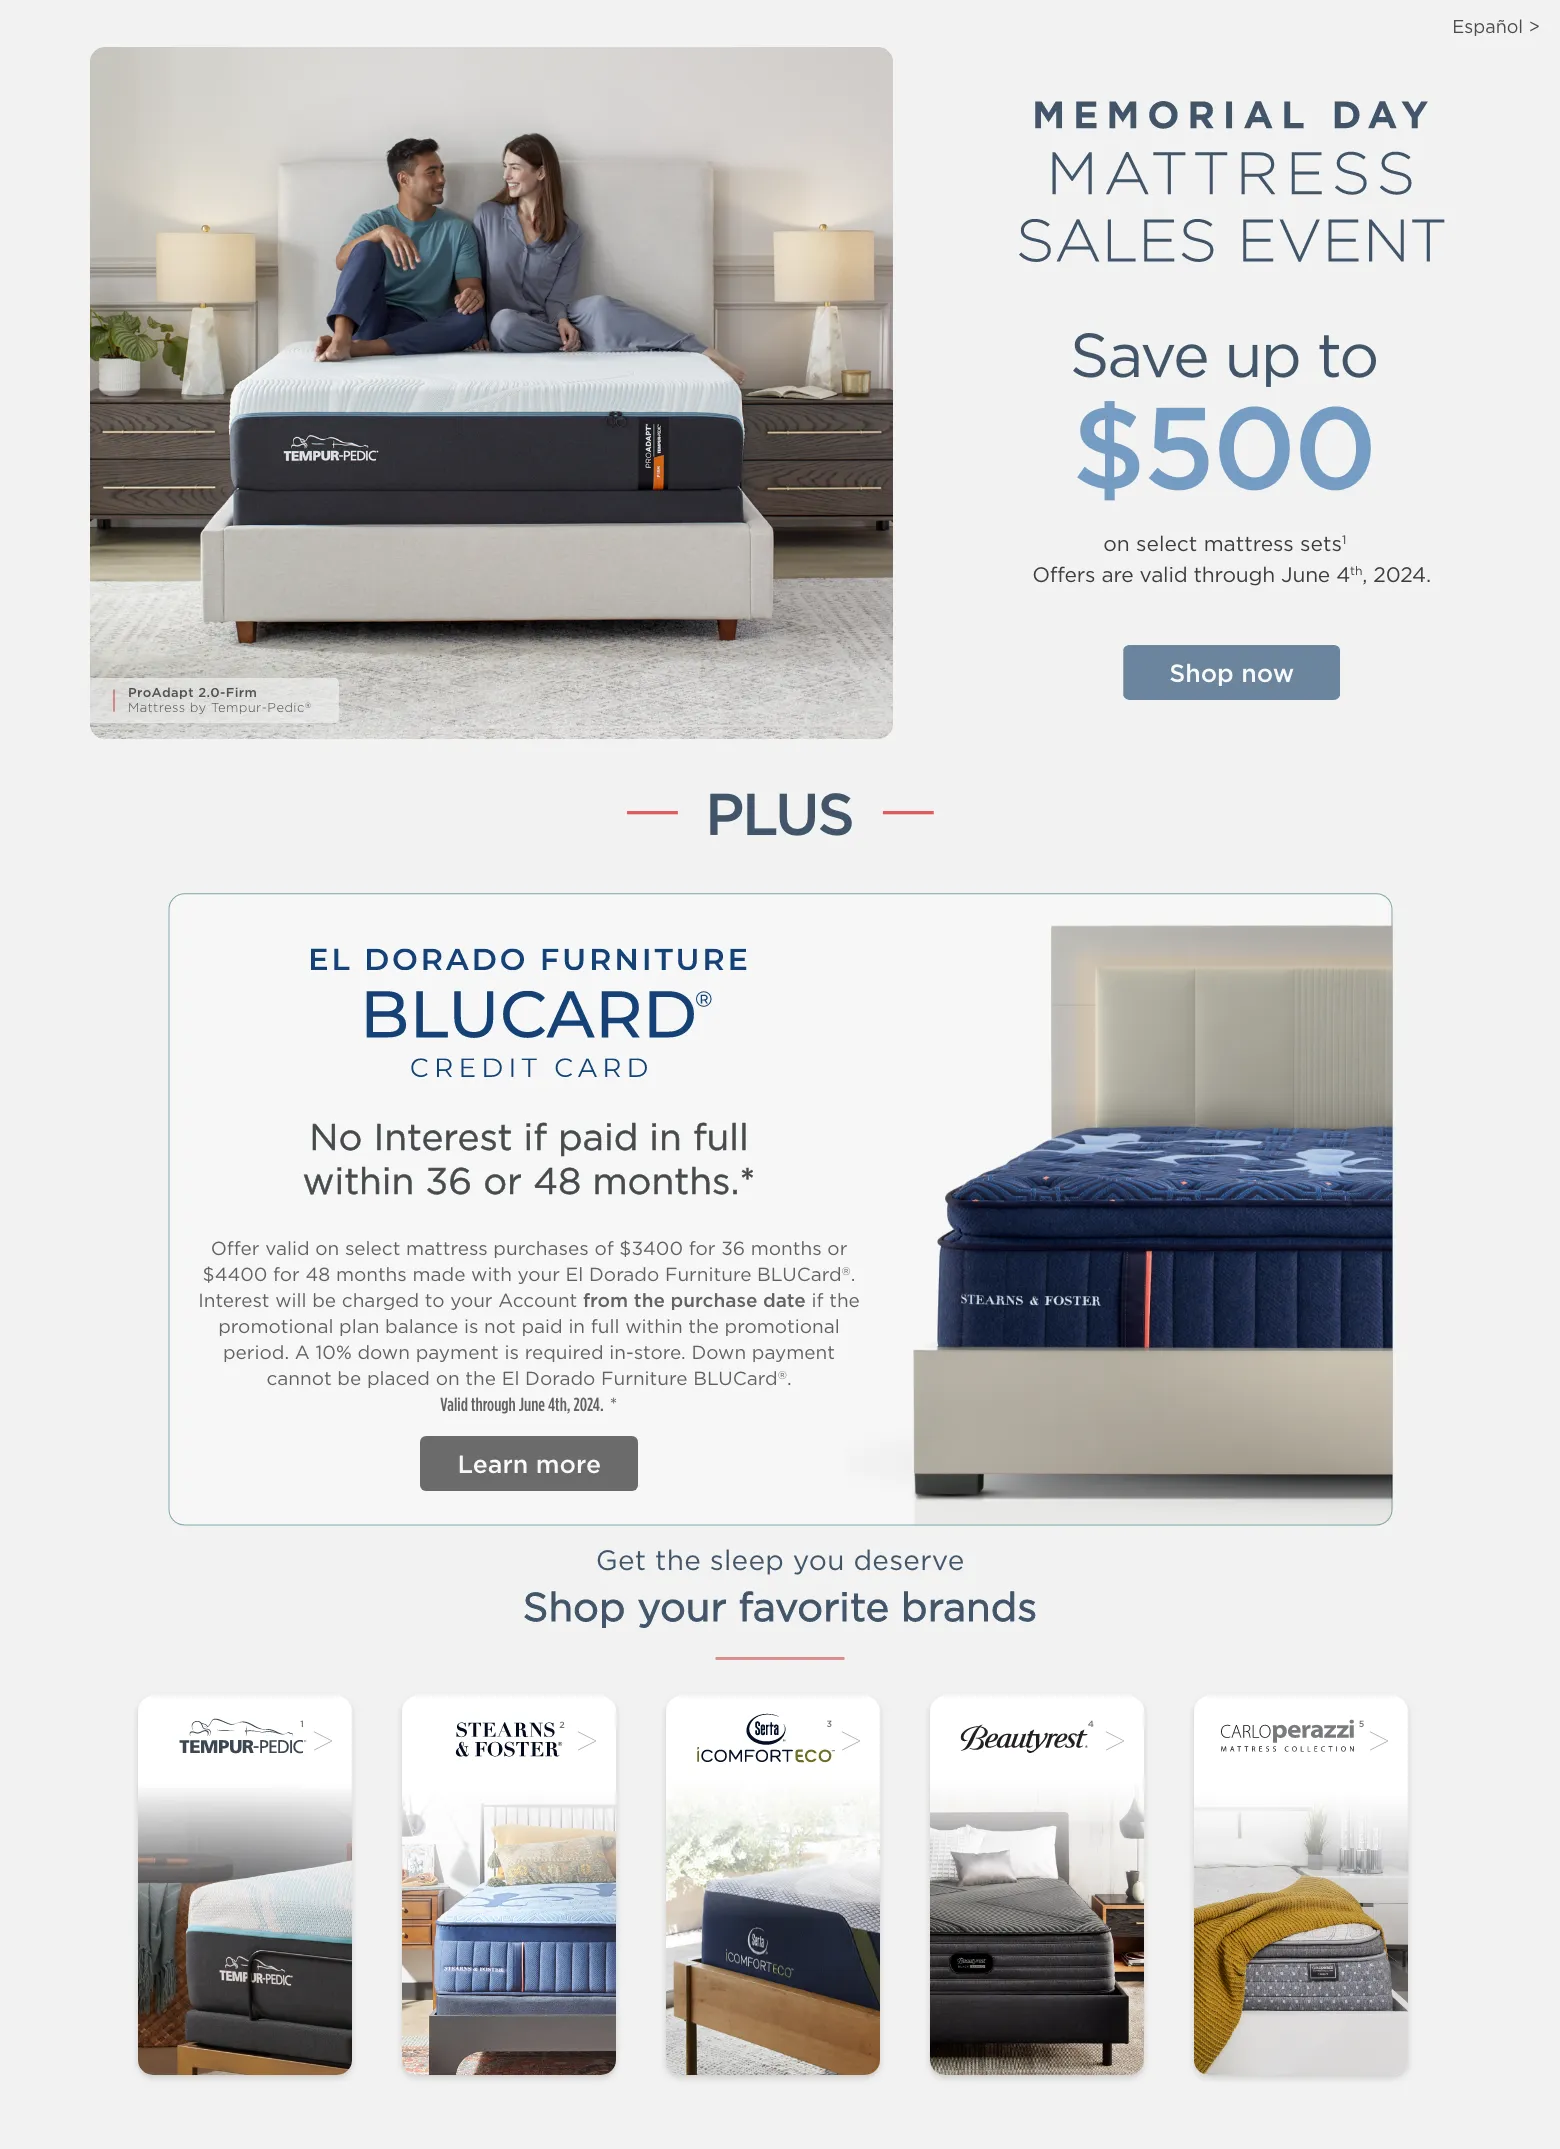 Memorial Day mattress sales event. Save up to $500 on select mattress sets1. Offers are valid through June 4th, 2024. Shop now. Plus No Interest if paid in full within 36 or 48 months.* El Dorado Furniture BLUCard® credit card. Offer valid on select mattress purchases of $3400 for 36 months or $4400 for 48 months made with your El Dorado Furniture BLUCard®. Interest will be charged to your Account from the purchase date if the promotional plan balance is not paid in full within the promotional period. A 10% down payment is required in-store. Down payment cannot be placed on the El Dorado Furniture BLUCard®. Valid through June 4th, 2024. *  Learn more. Get the sleep you deserve Shop your favorite brands. Serta. Beautyrest®. Tempur-pedic®. Stearns and Foster. CARLOperazzi.